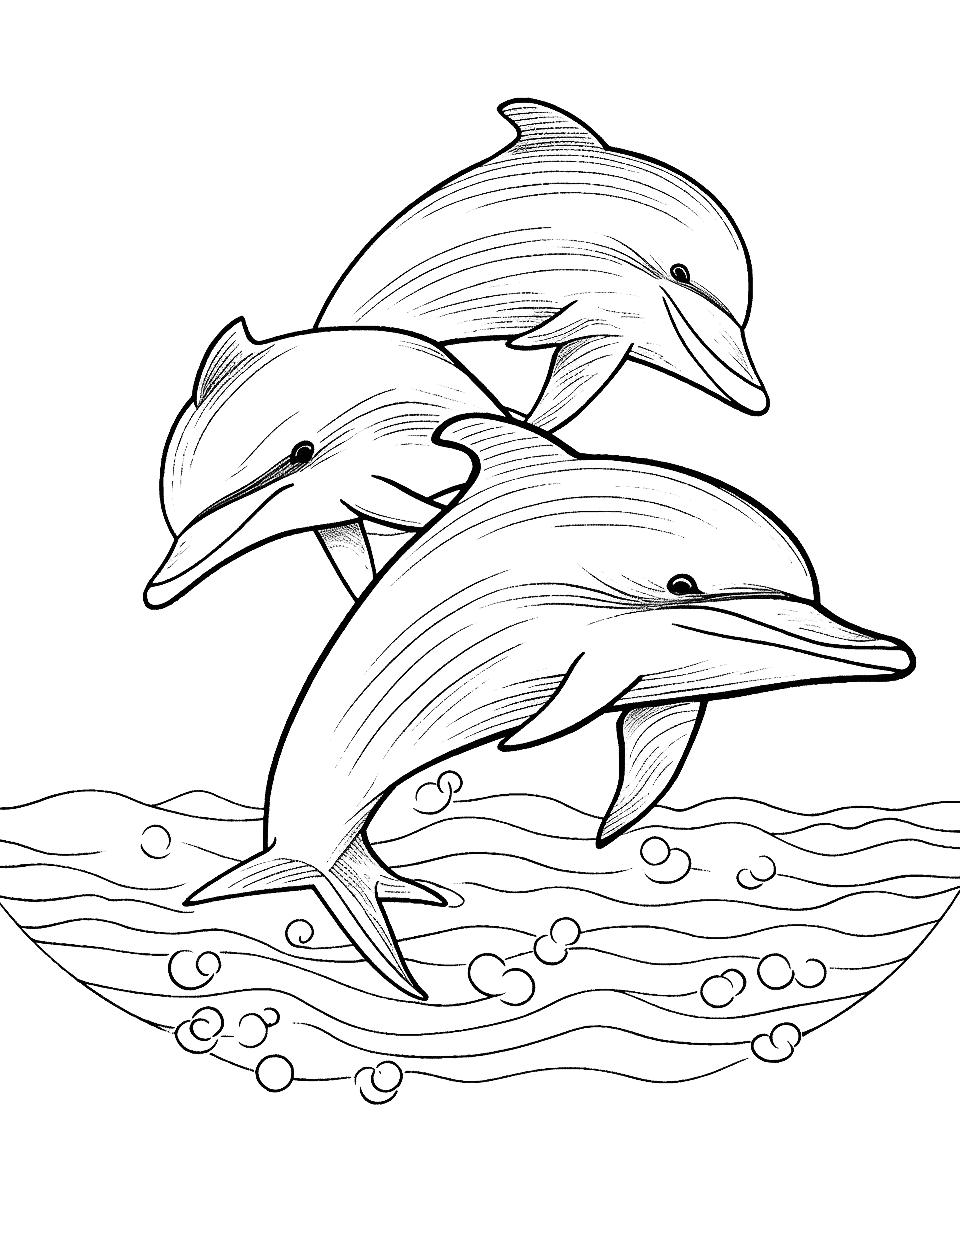 Playful Dolphin Pod Animal Coloring Page - A group of dolphins leaping and playing together in the ocean waves.